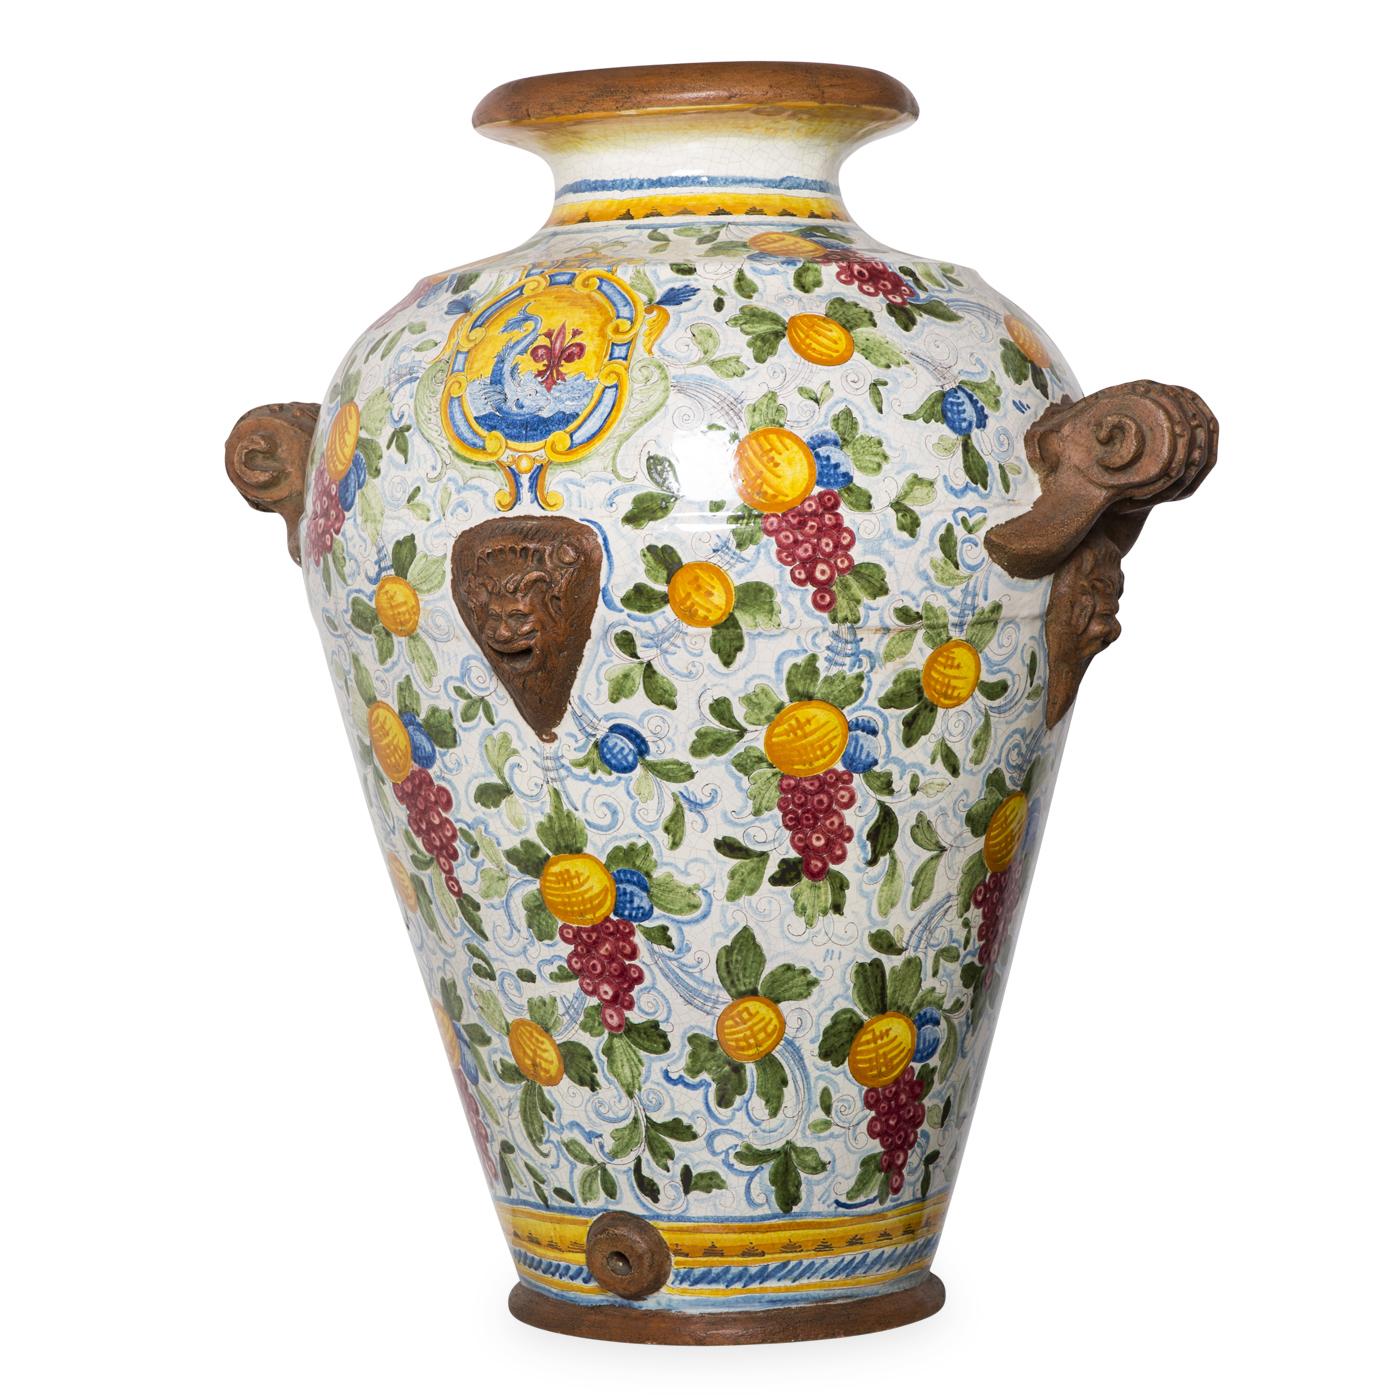 Faenza has since long been a major center for ceramics in Italy. This splendid large ceramic jar follows the town's typical style, with an original floral and fruit design in characteristic antimony yellow and yellow ochre. The vase is meticulously